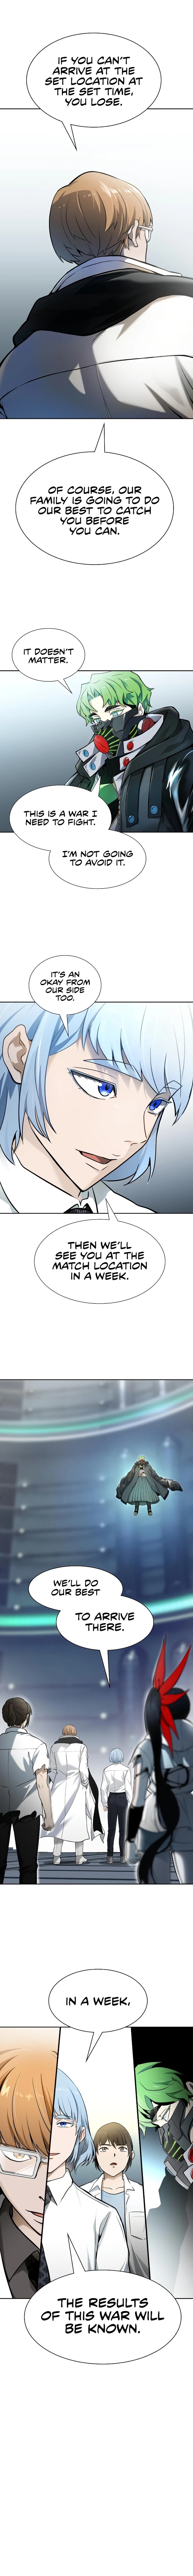 Tower Of God 575 18